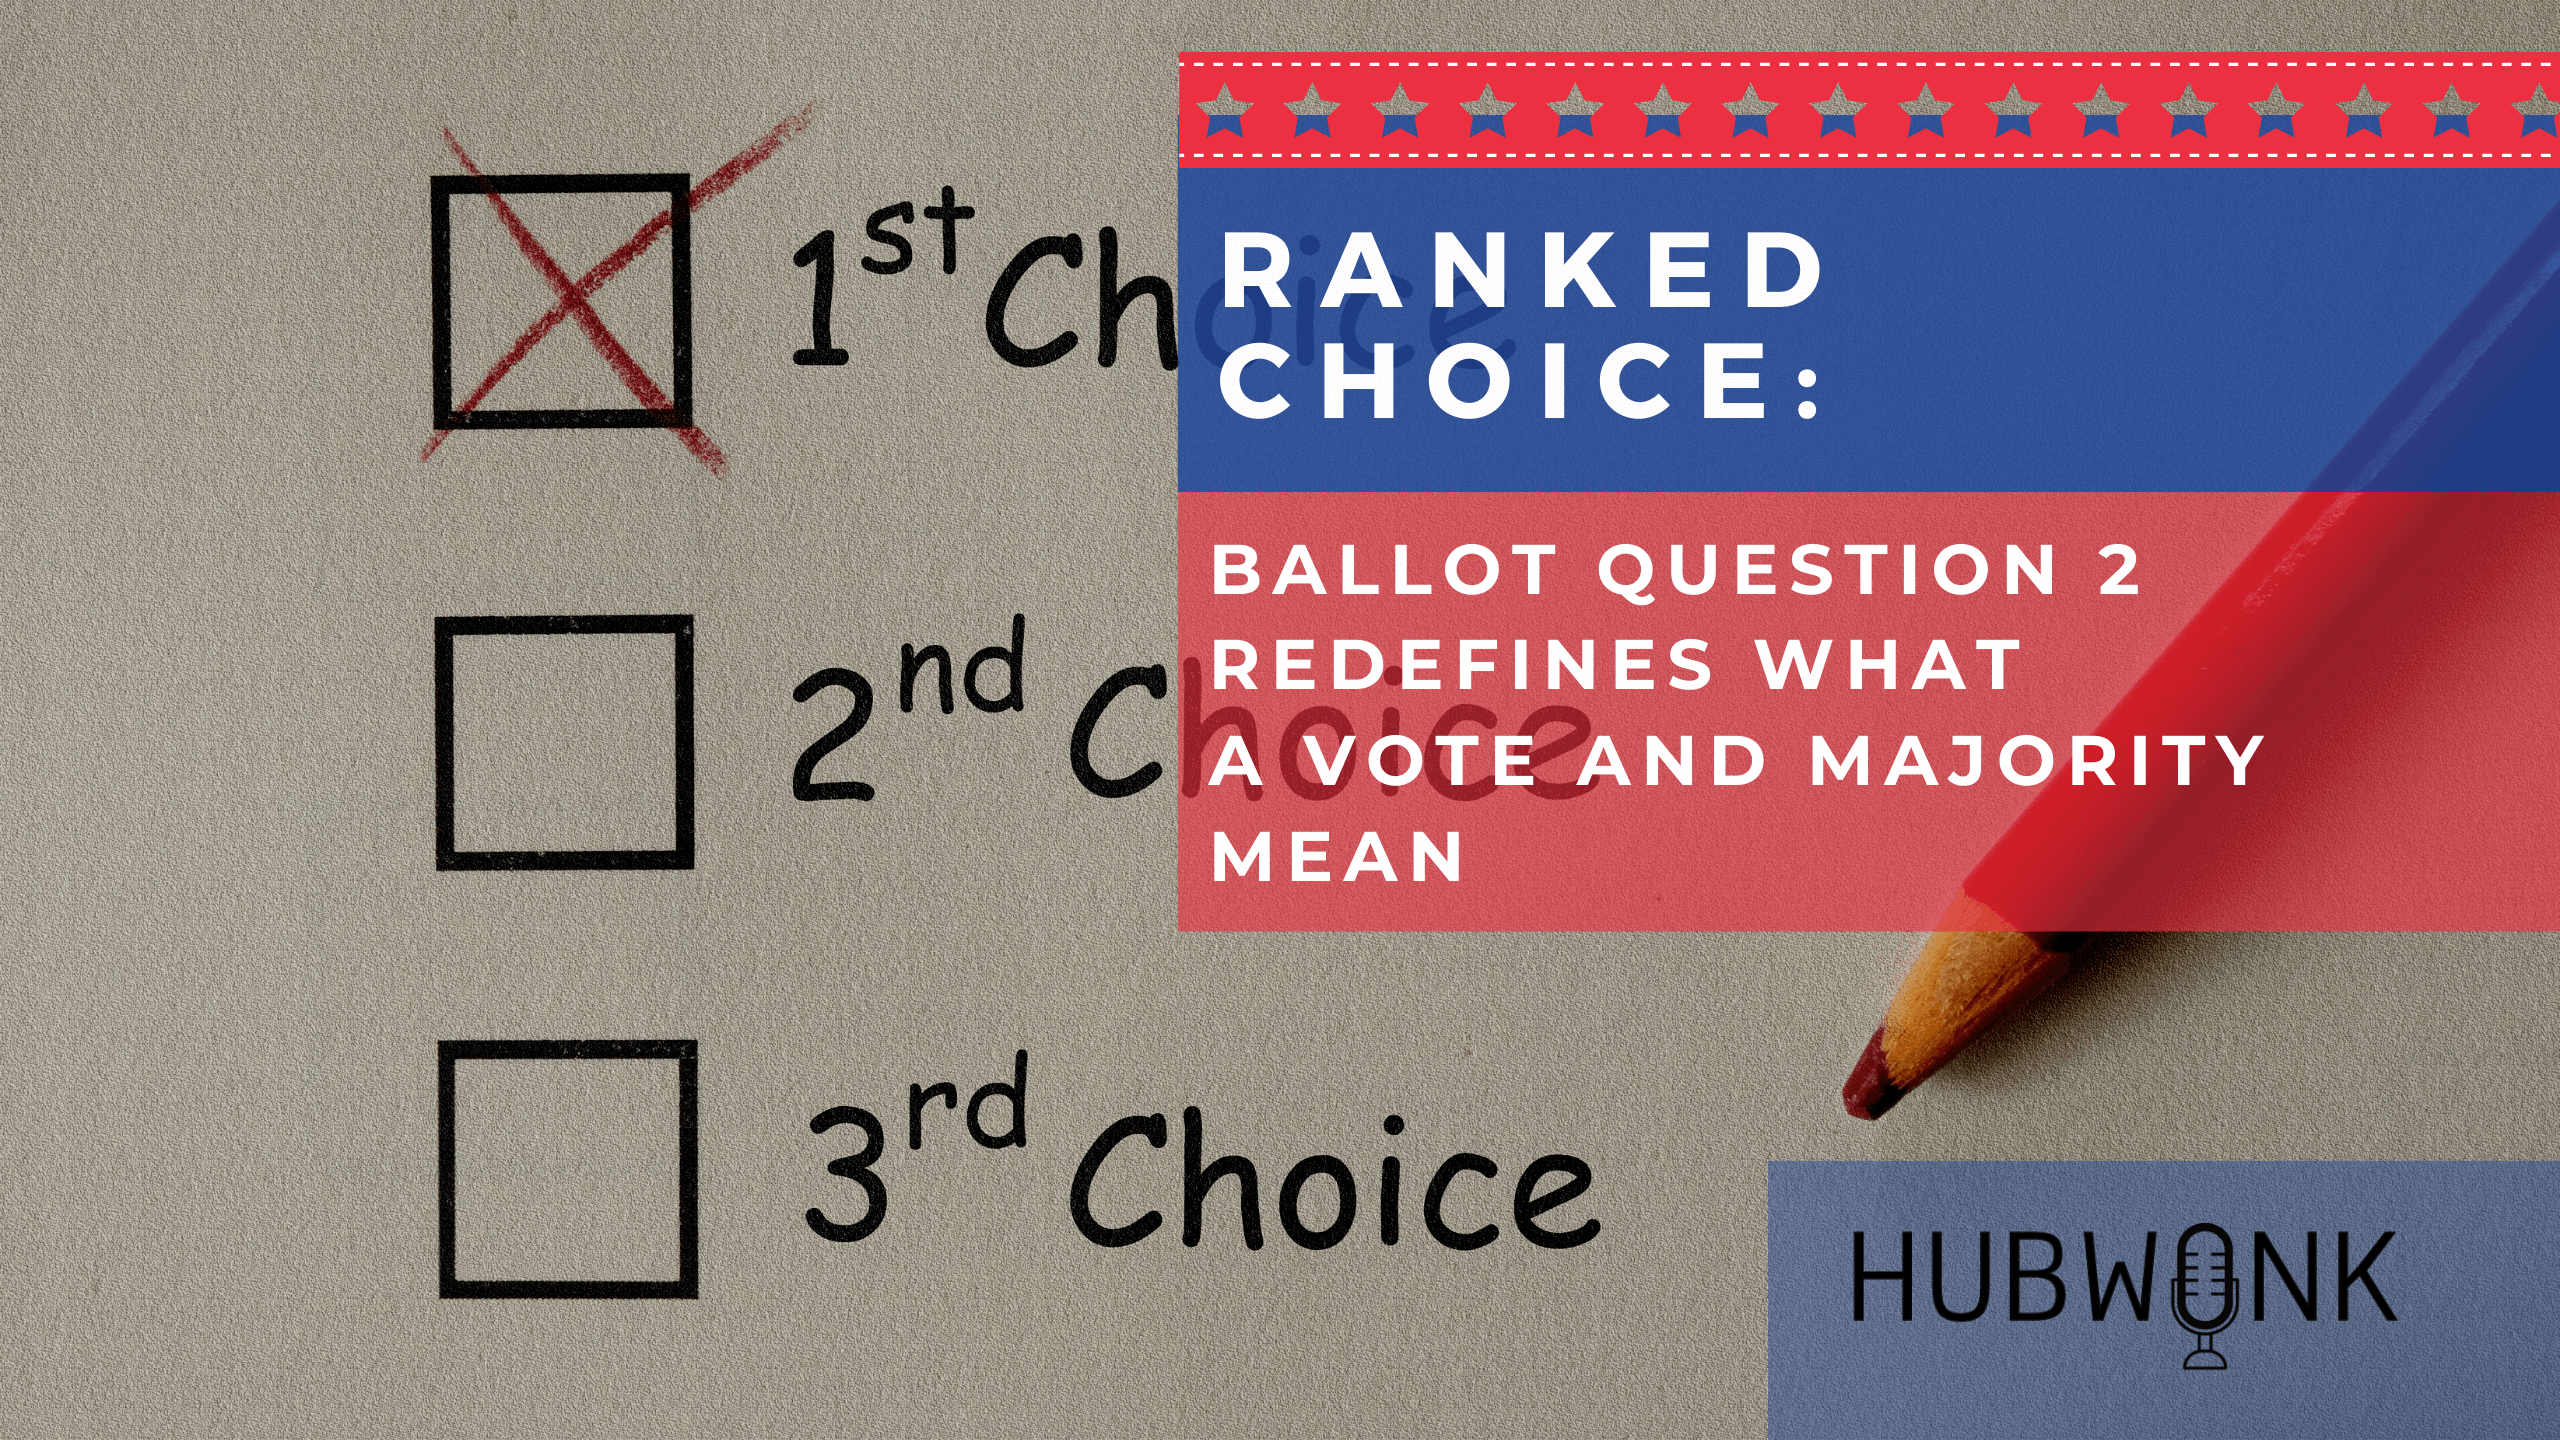 Ranked Choice: Ballot Question 2 Redefines What a Vote and Majority Mean